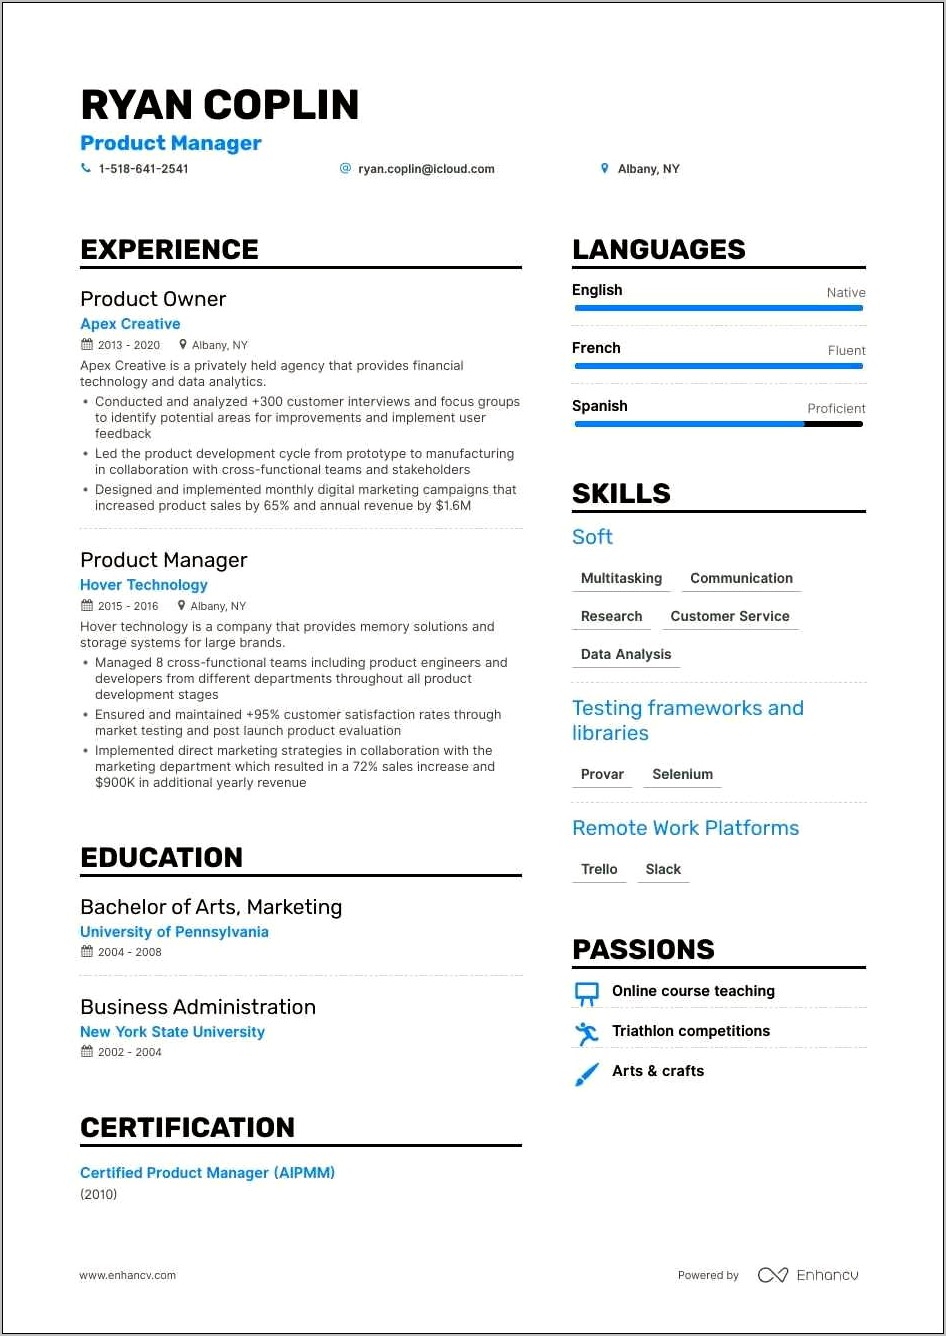 Show Work From Home On Resume